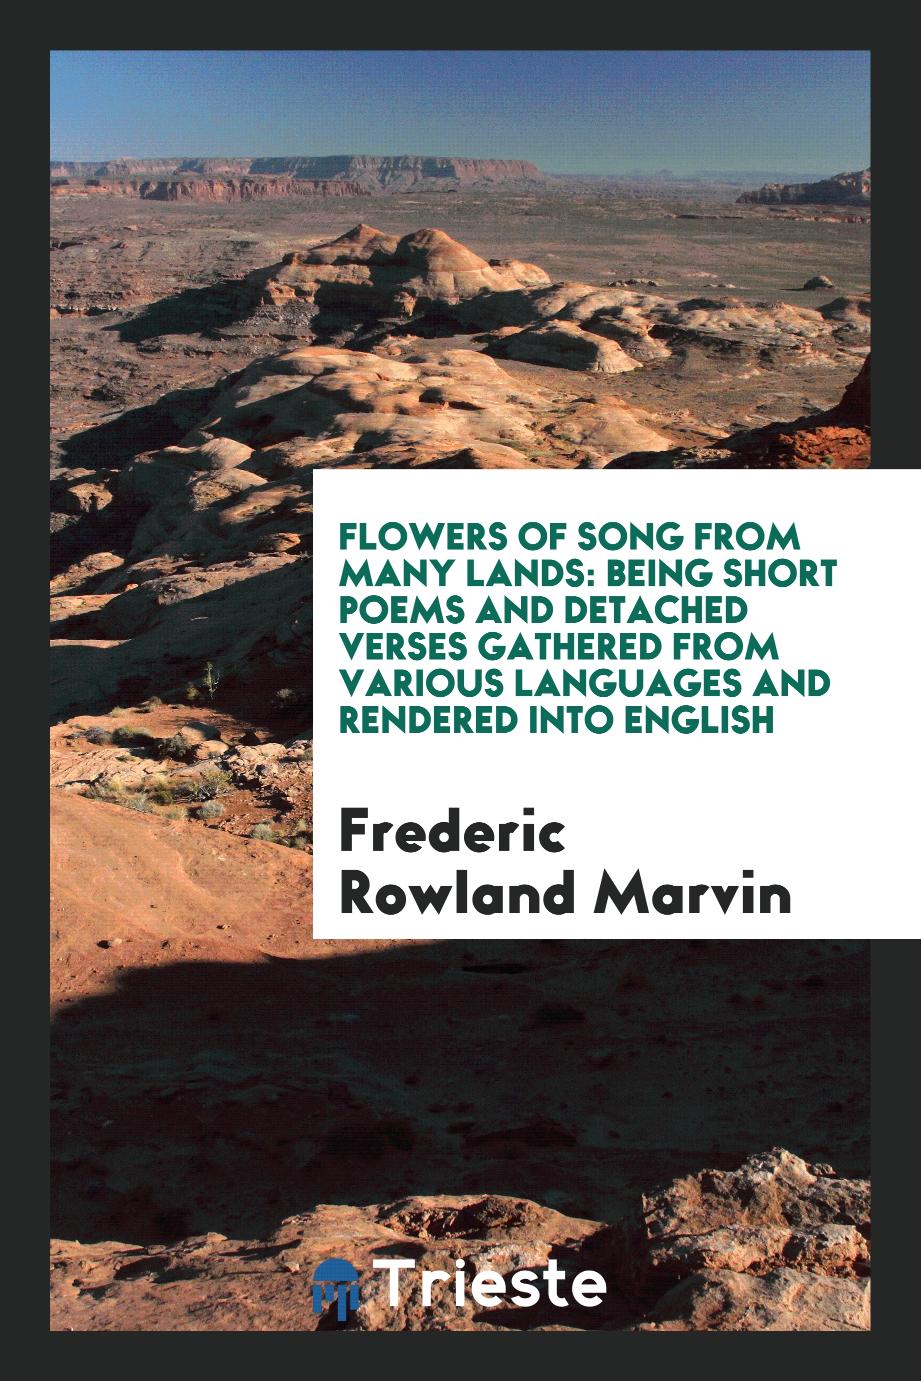 Flowers of Song from Many Lands: Being Short Poems and Detached Verses Gathered from Various Languages and Rendered into English